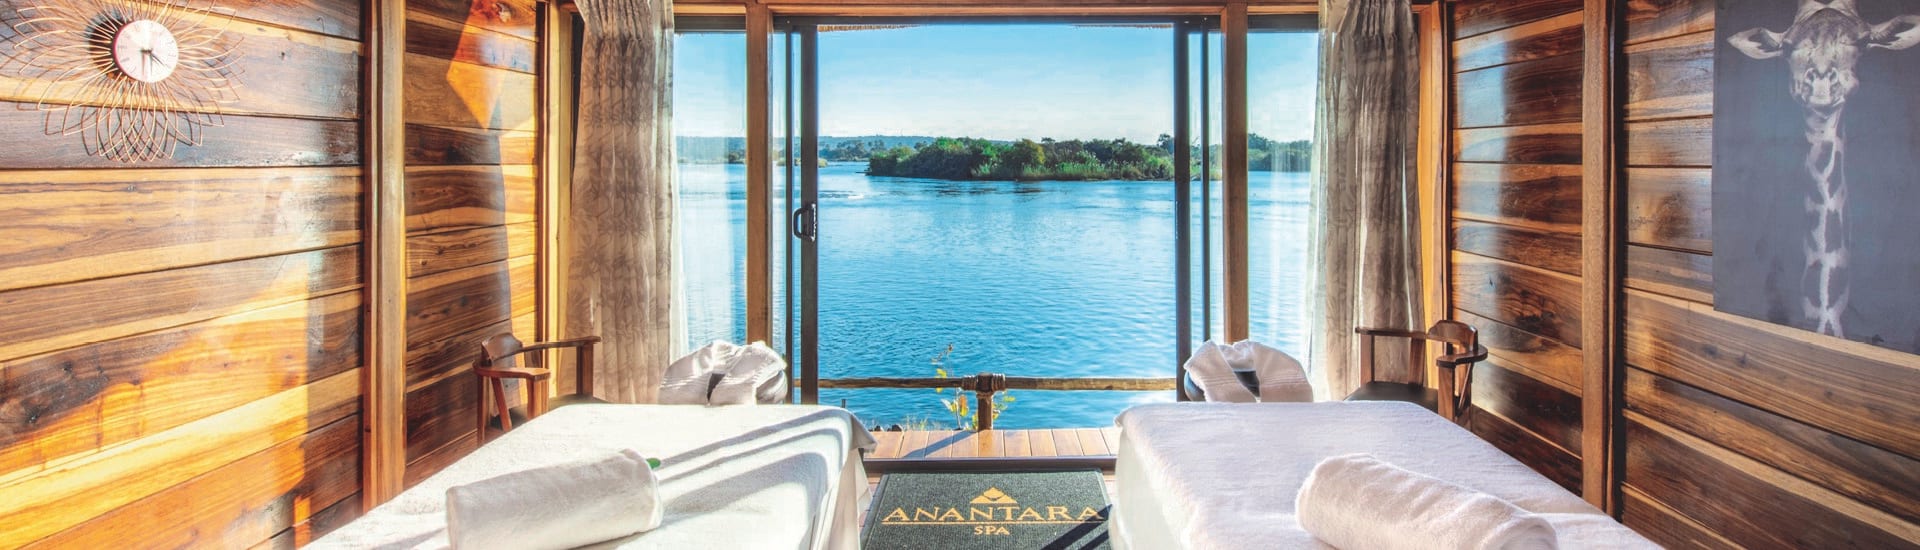 Anantara Spa Couples Treatment Room with River View